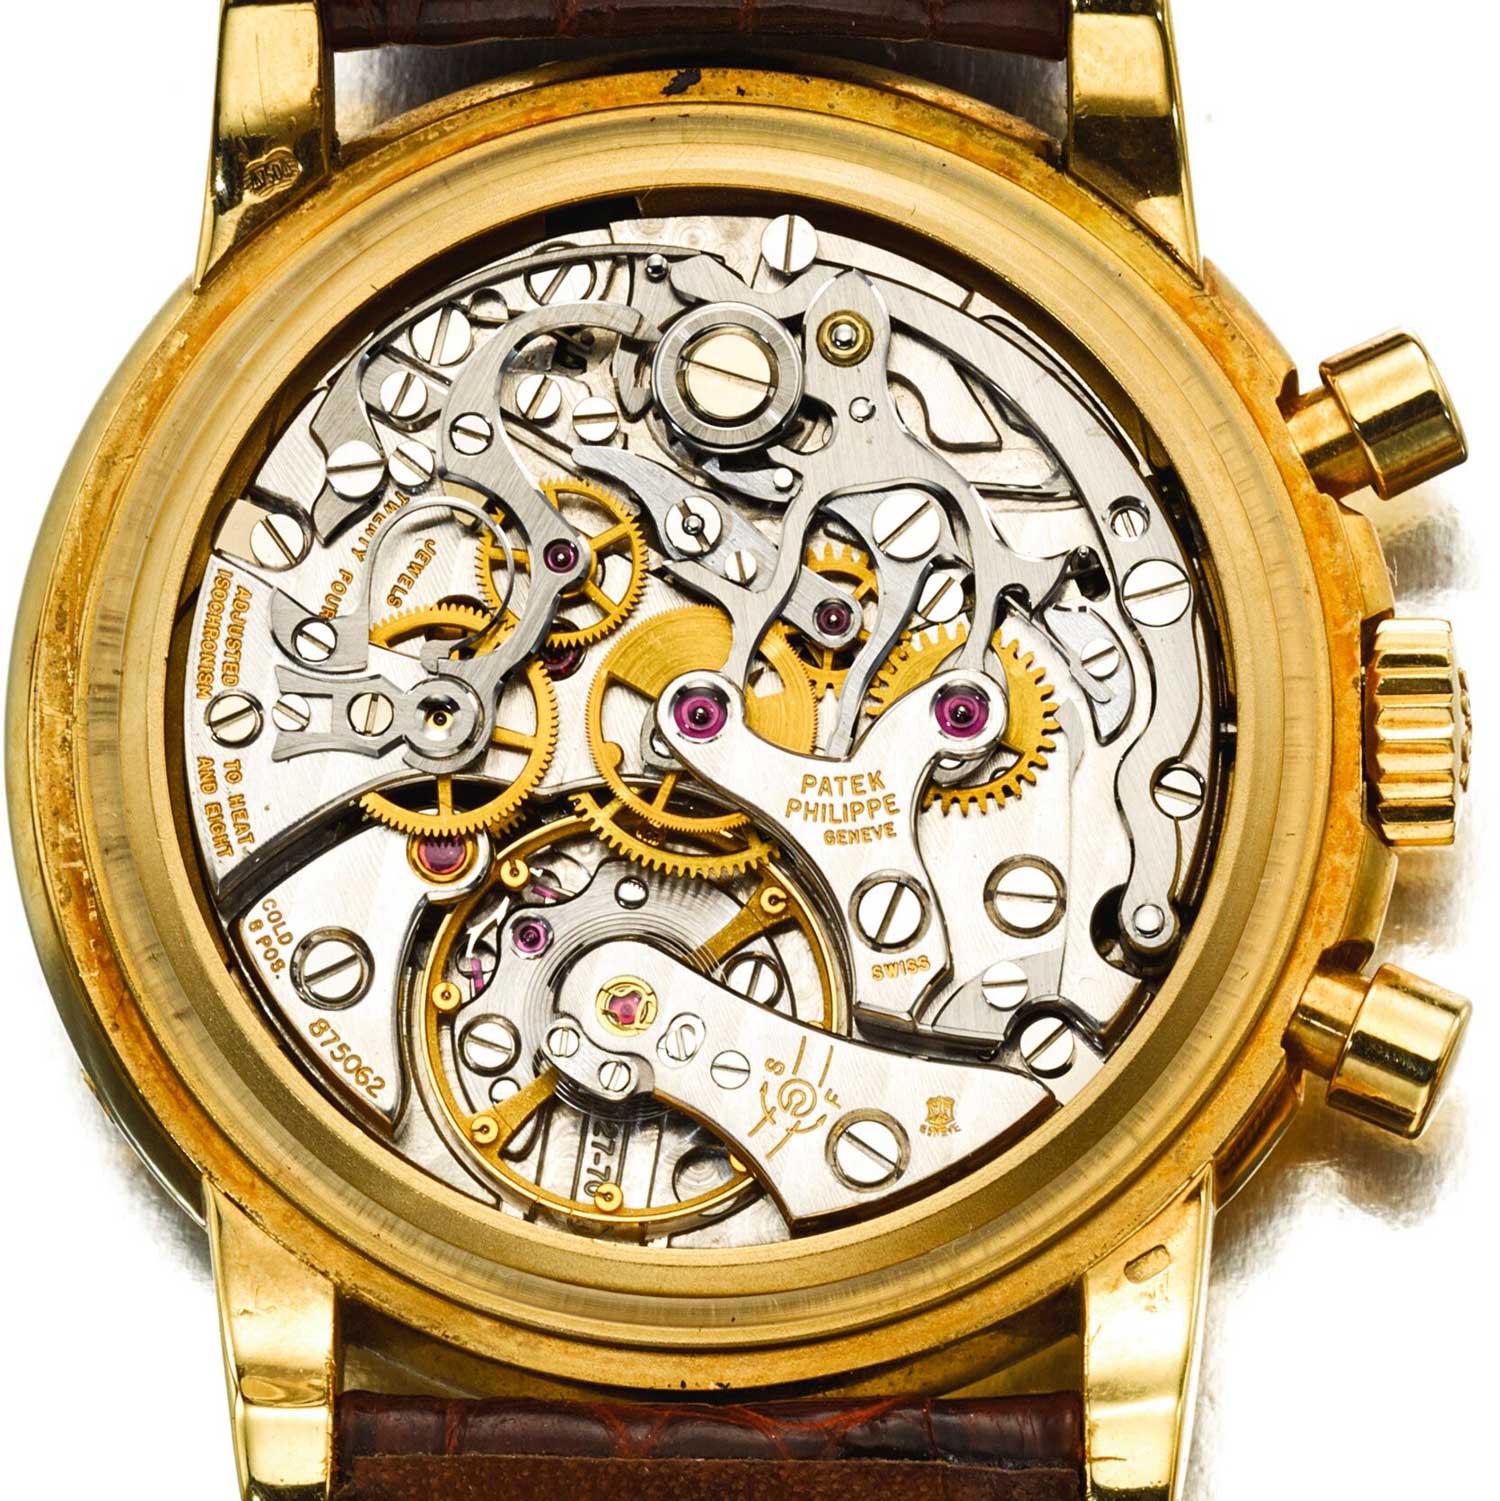 Patek's take on the Lemania 2310 movement in the ref. 3970, renamed the Cal. CH 27-70 Q was introduced in 1985 (Image: sothebys.com)